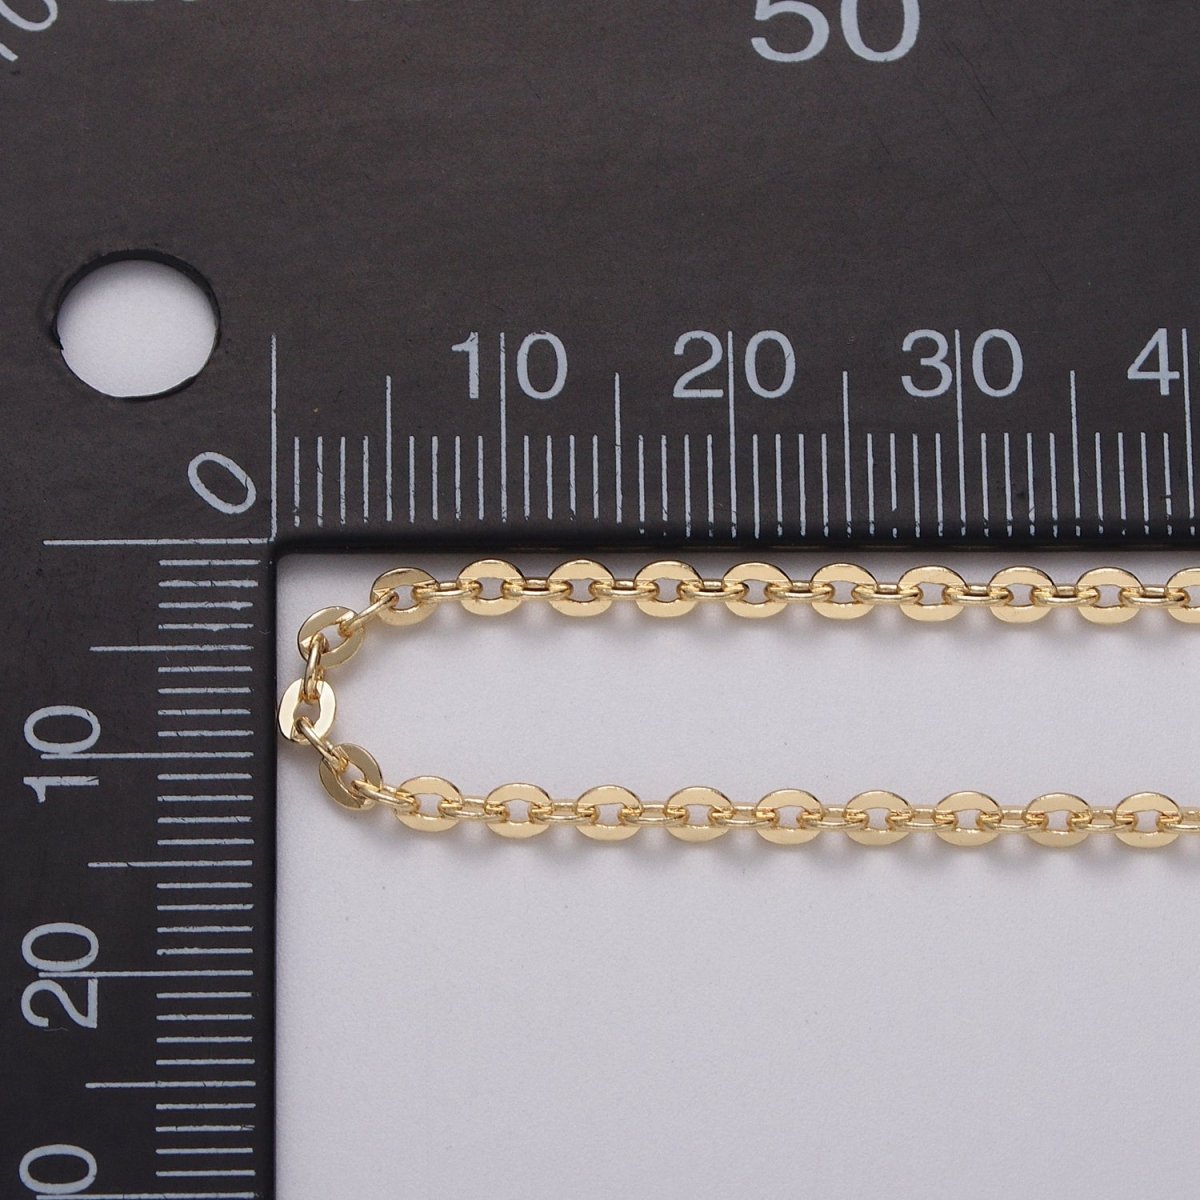 24K Gold Filled 2.5mm Dainty Cable Rolo Unfinished Chain by Yard in Gold & Silver | ROLL-1065, ROLL-1096 Clearance Pricing - DLUXCA